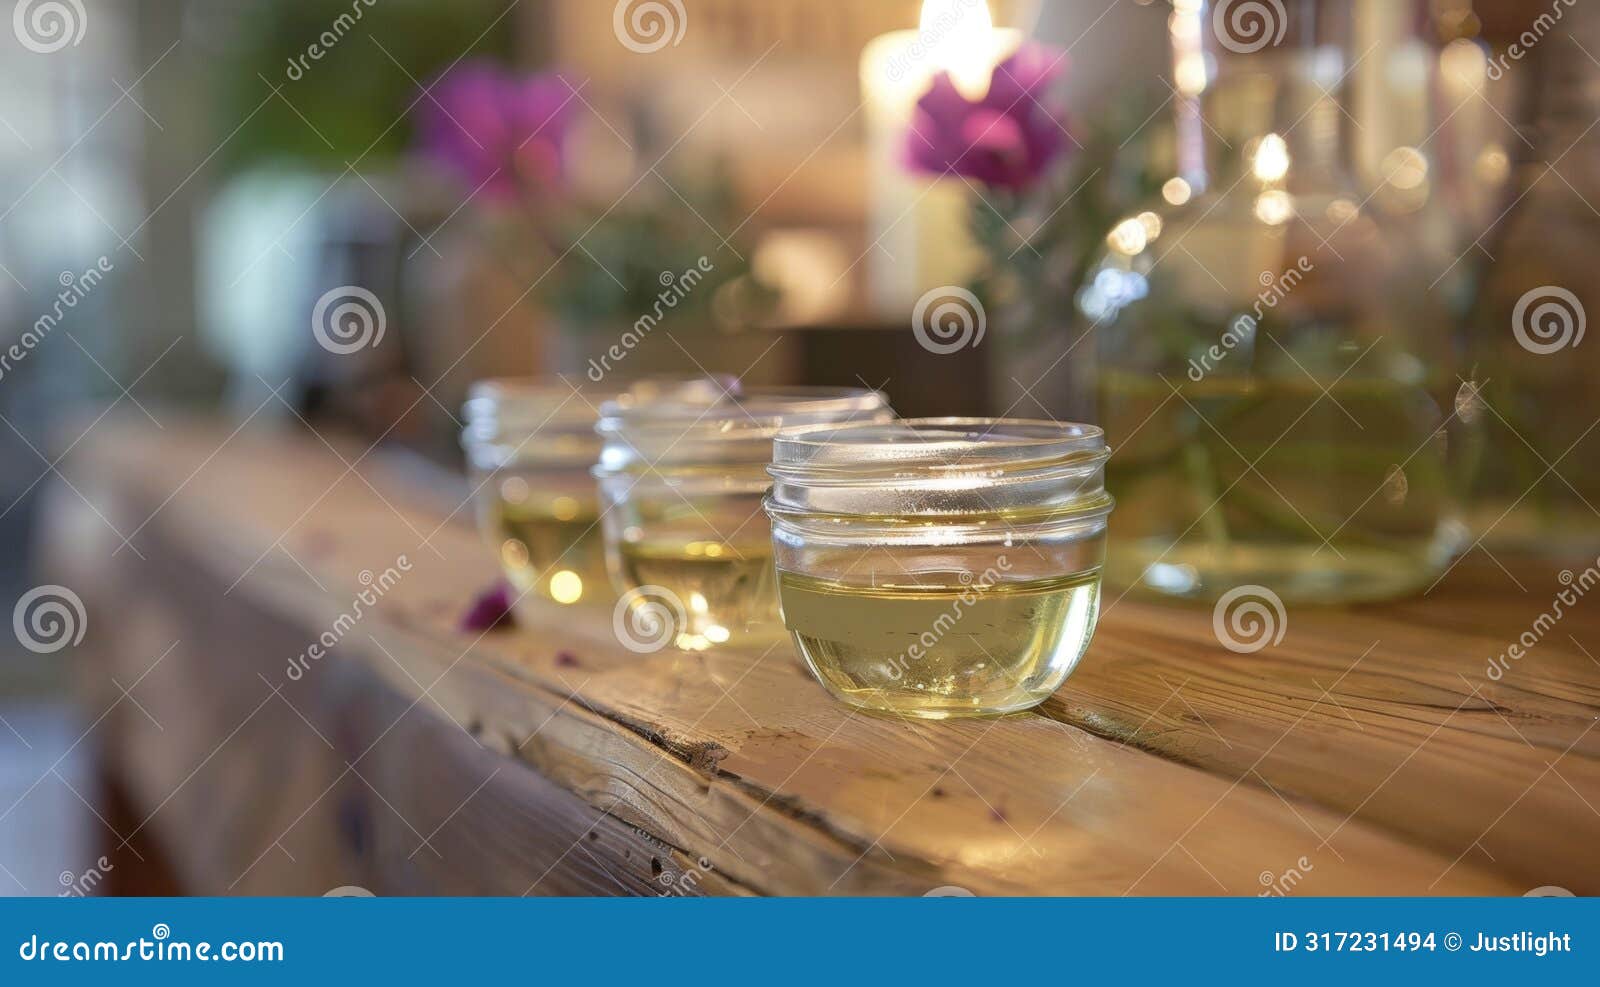 a jar of smooth fragrant oil poured over the skin before cupping to help the cups glide smoothly and prevent bruising